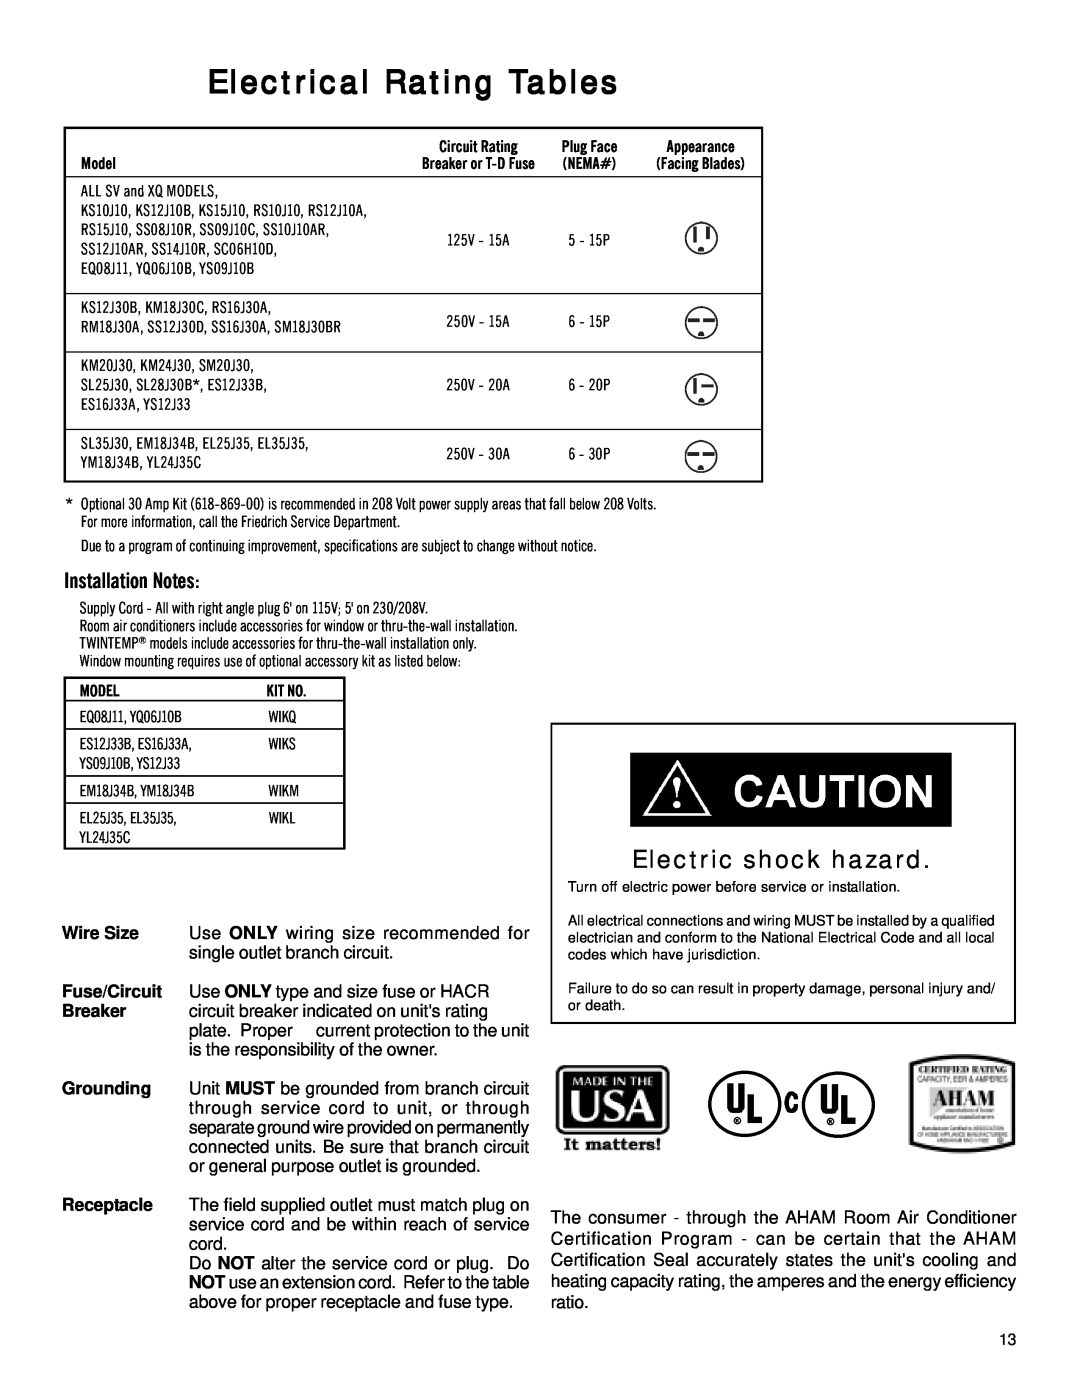 Friedrich 2003 Electrical Rating Tables, Electric shock hazard, Installation Notes, Wire Size, Fuse/Circuit, Breaker 